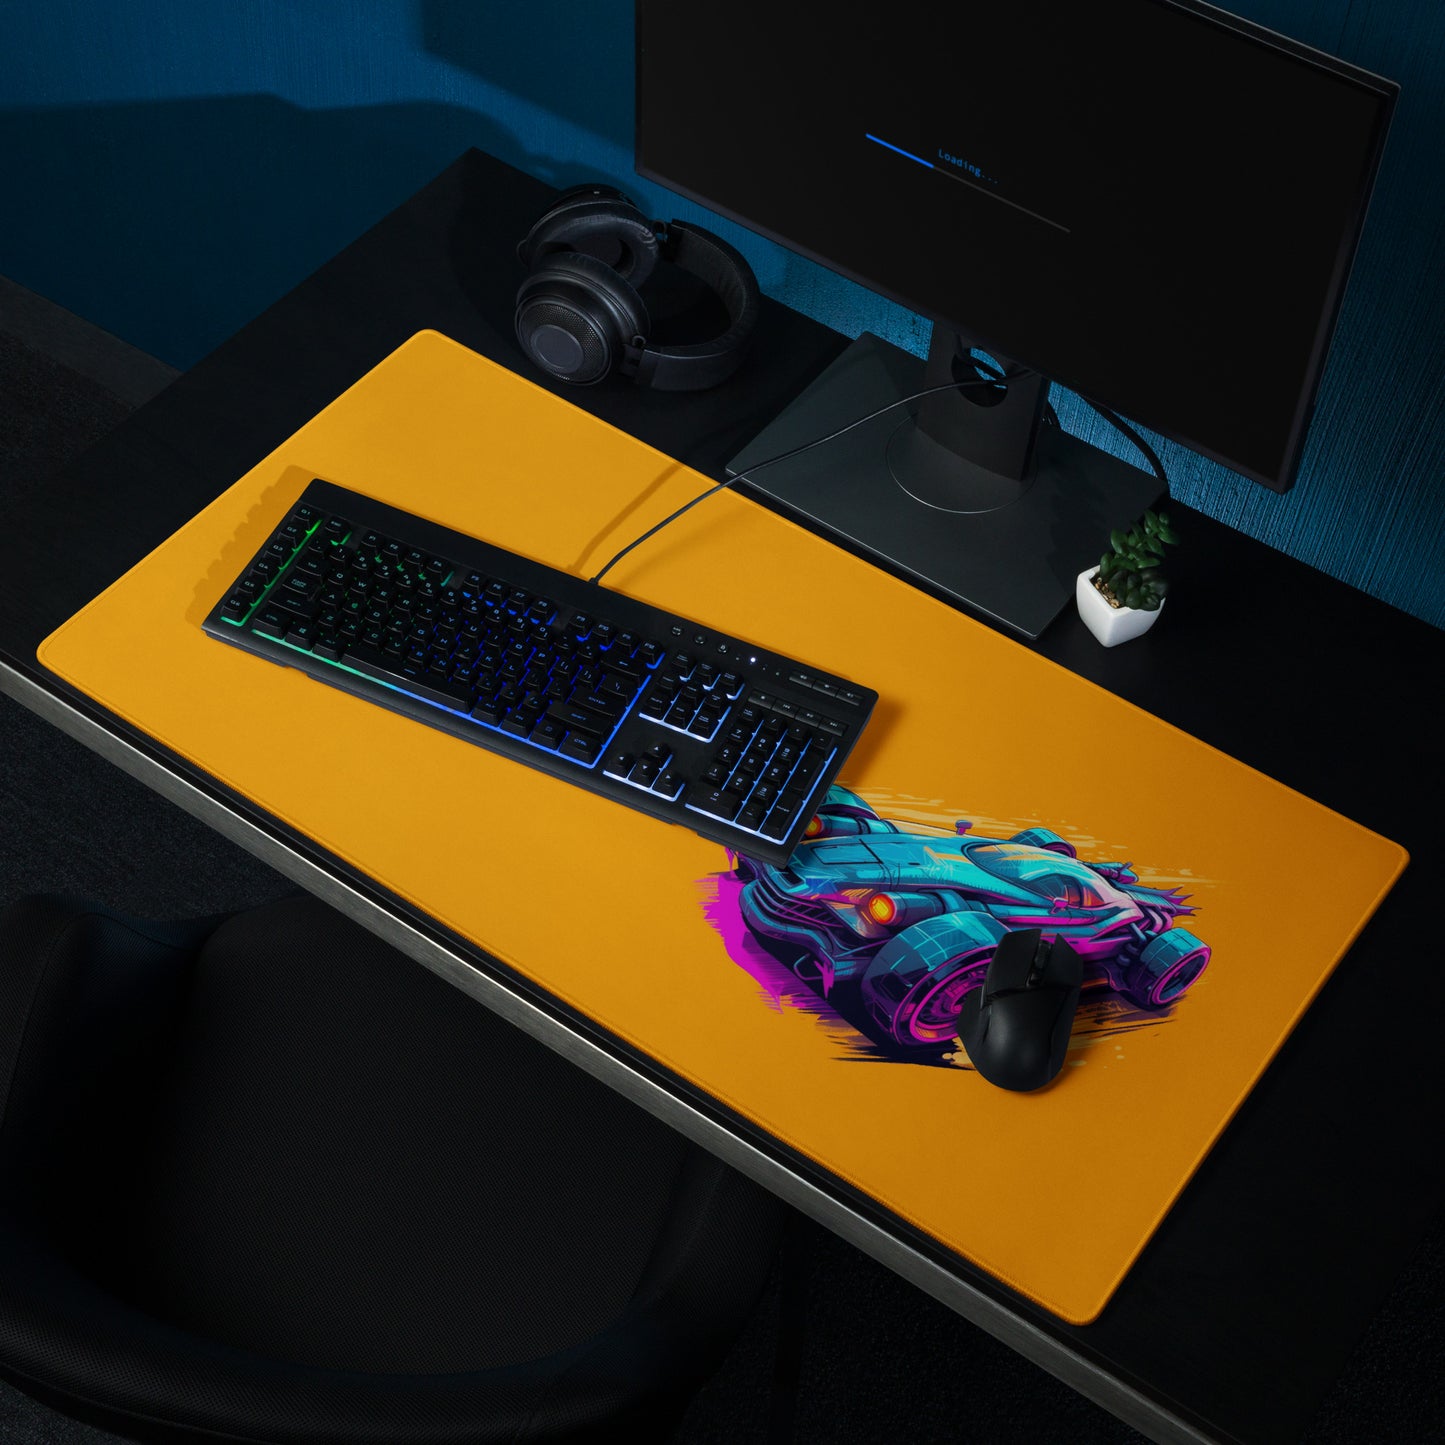 A 36" x 18" desk pad with a futuristic race car displayed on the right shown on a desk setup. Orange in color.